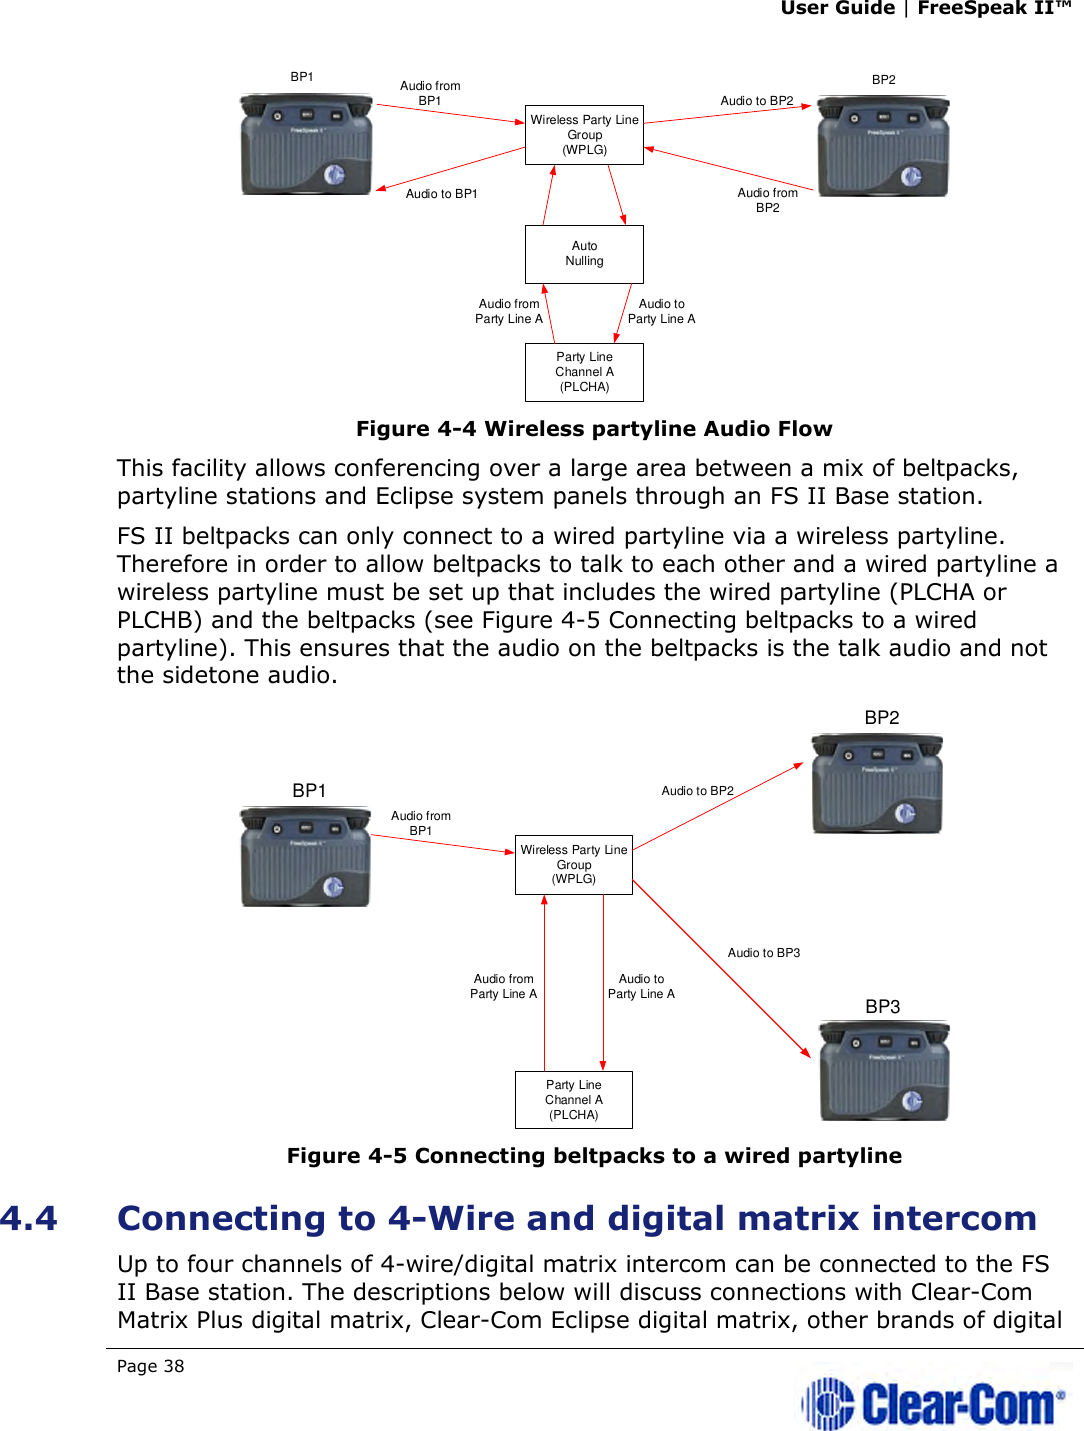 User Guide | FreeSpeak II™  Page 38    Figure 4-4 Wireless partyline Audio Flow This facility allows conferencing over a large area between a mix of beltpacks, partyline stations and Eclipse system panels through an FS II Base station. FS II beltpacks can only connect to a wired partyline via a wireless partyline. Therefore in order to allow beltpacks to talk to each other and a wired partyline a wireless partyline must be set up that includes the wired partyline (PLCHA or PLCHB) and the beltpacks (see Figure 4-5 Connecting beltpacks to a wired partyline). This ensures that the audio on the beltpacks is the talk audio and not the sidetone audio.  Figure 4-5 Connecting beltpacks to a wired partyline 4.4 Connecting to 4-Wire and digital matrix intercom Up to four channels of 4-wire/digital matrix intercom can be connected to the FS II Base station. The descriptions below will discuss connections with Clear-Com Matrix Plus digital matrix, Clear-Com Eclipse digital matrix, other brands of digital Wireless Party Line Group(WPLG)AutoNullingParty LineChannel A(PLCHA)BP1 BP2Audio from BP1Audio to BP1 Audio from BP2Audio to BP2Audio fromParty Line A Audio toParty Line AWireless Party Line Group(WPLG)Party LineChannel A(PLCHA)BP1BP2Audio from BP1Audio to BP2Audio fromParty Line A Audio toParty Line ABP3Audio to BP3